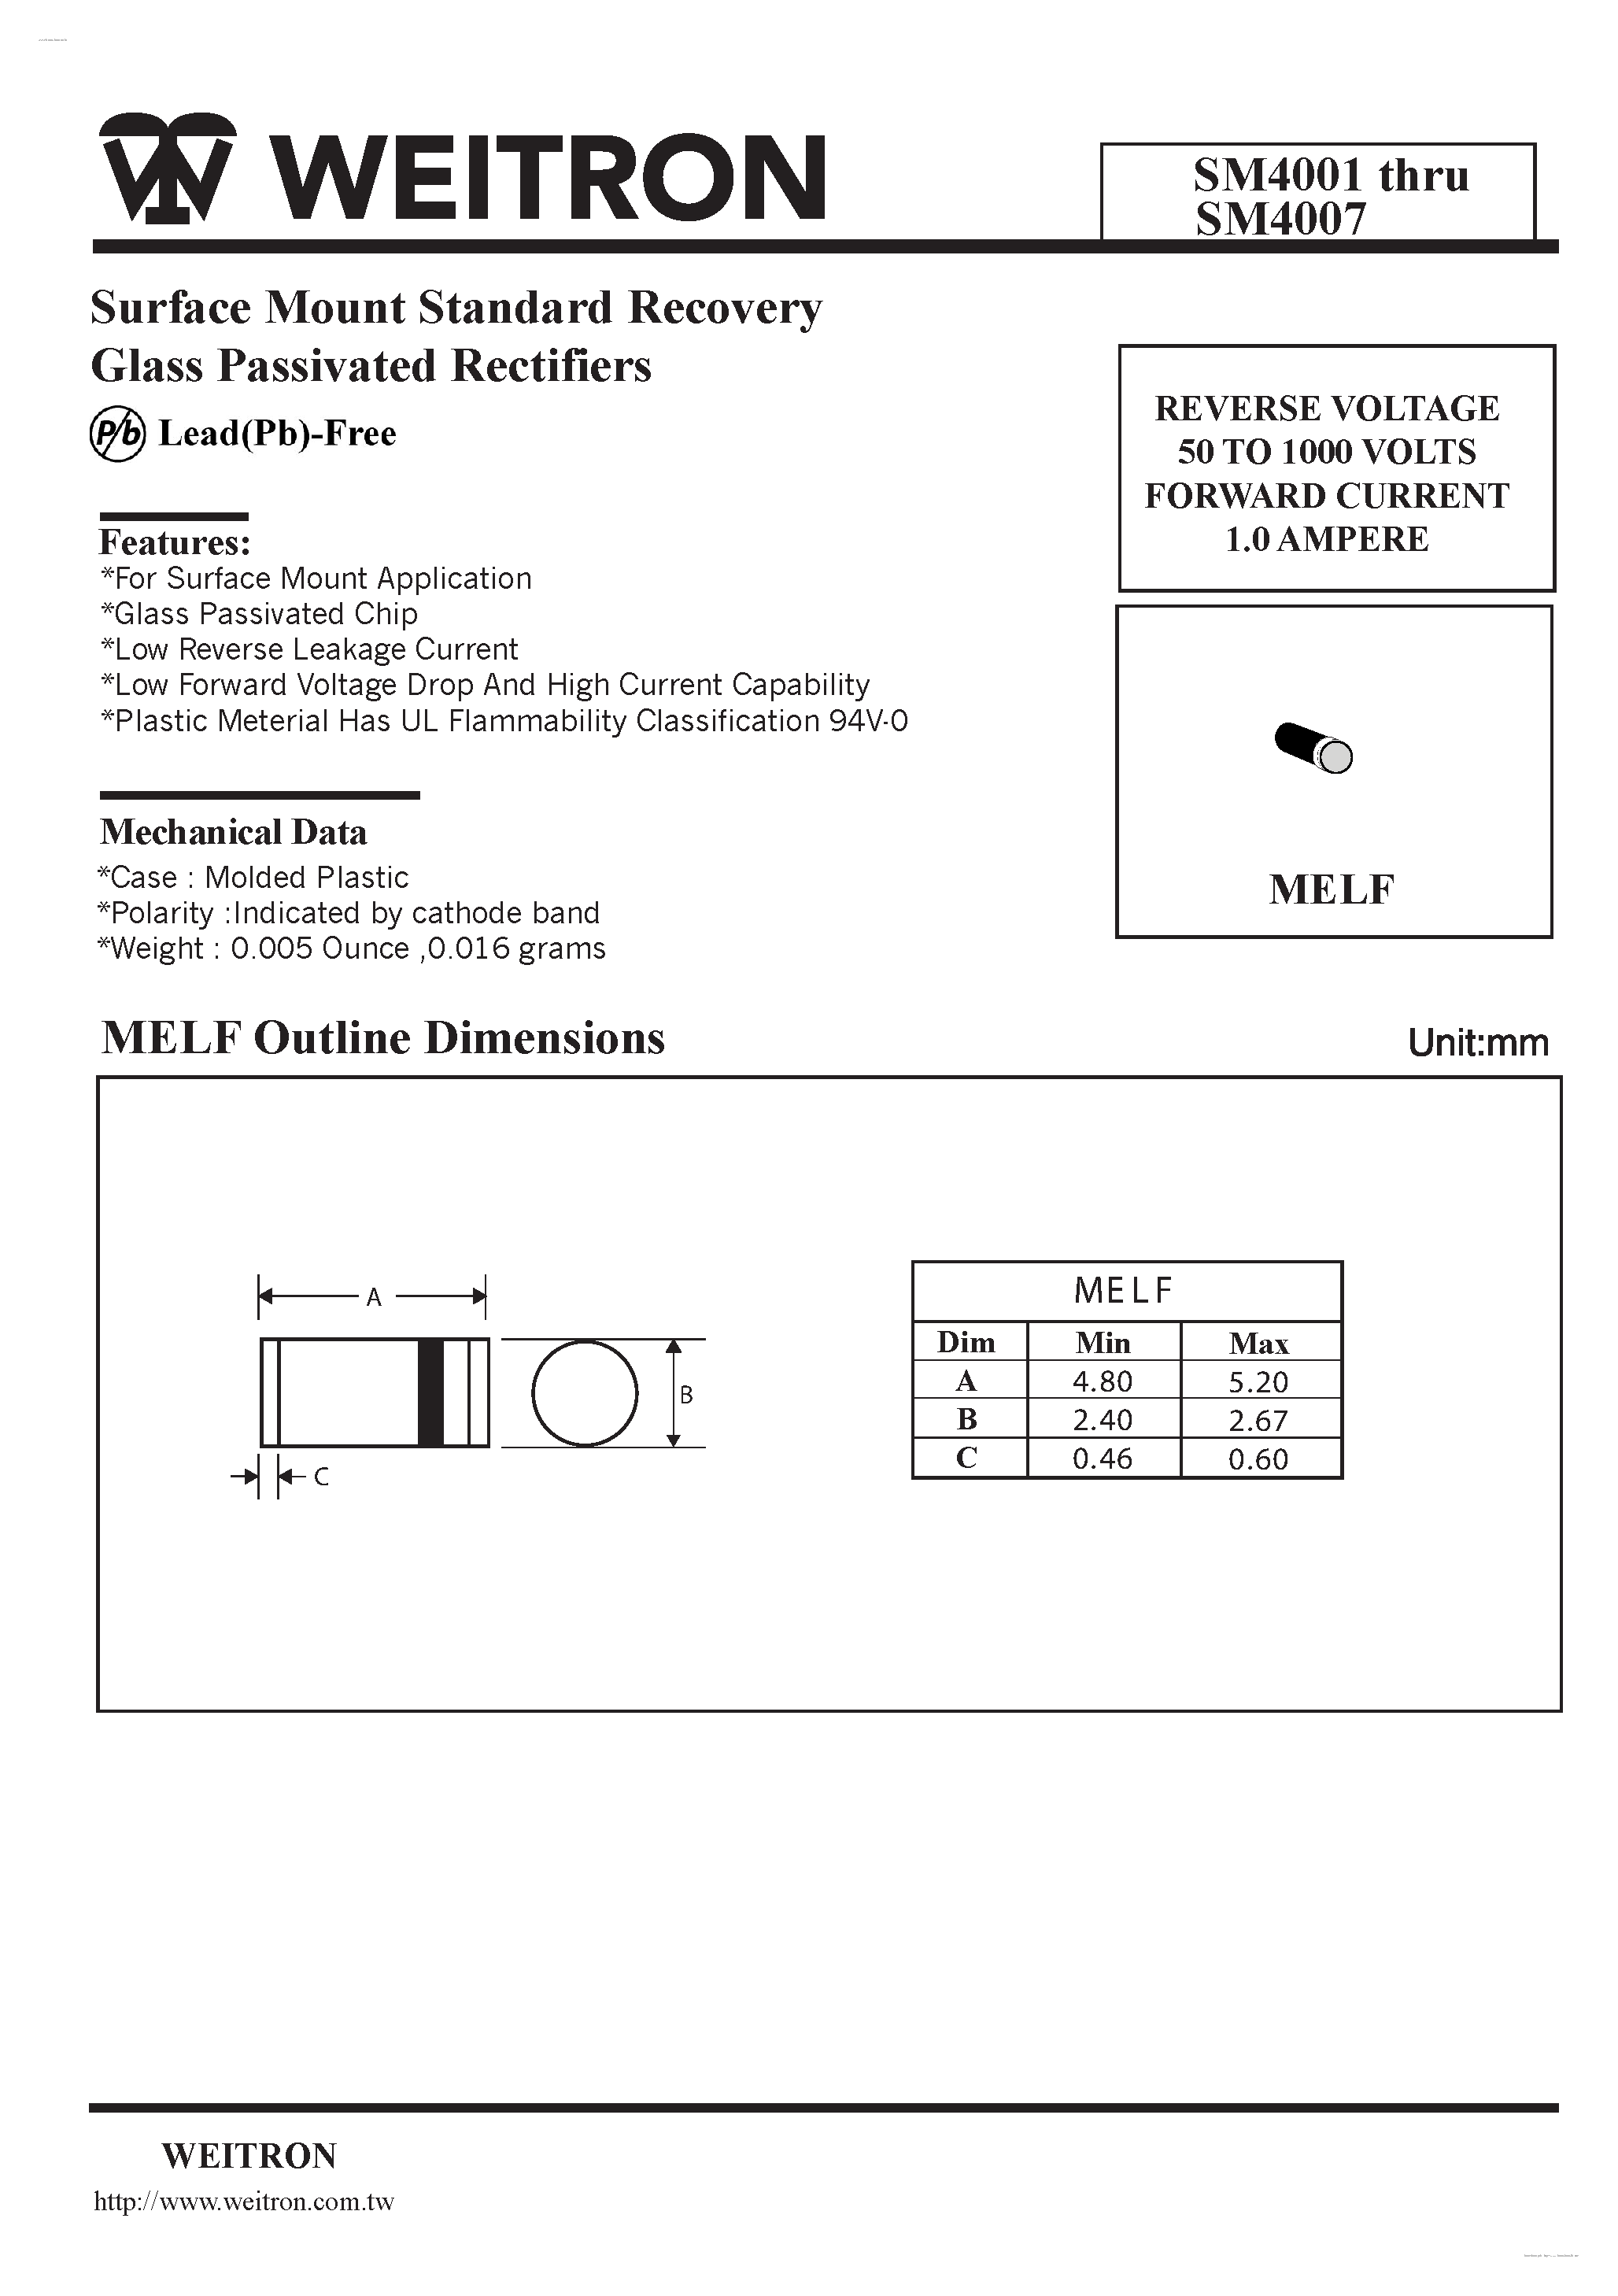 Datasheet SM4001 - (SM4001 - SM4007) Surface Mount Standard Recovery Glass Passivated Rectifiers page 1